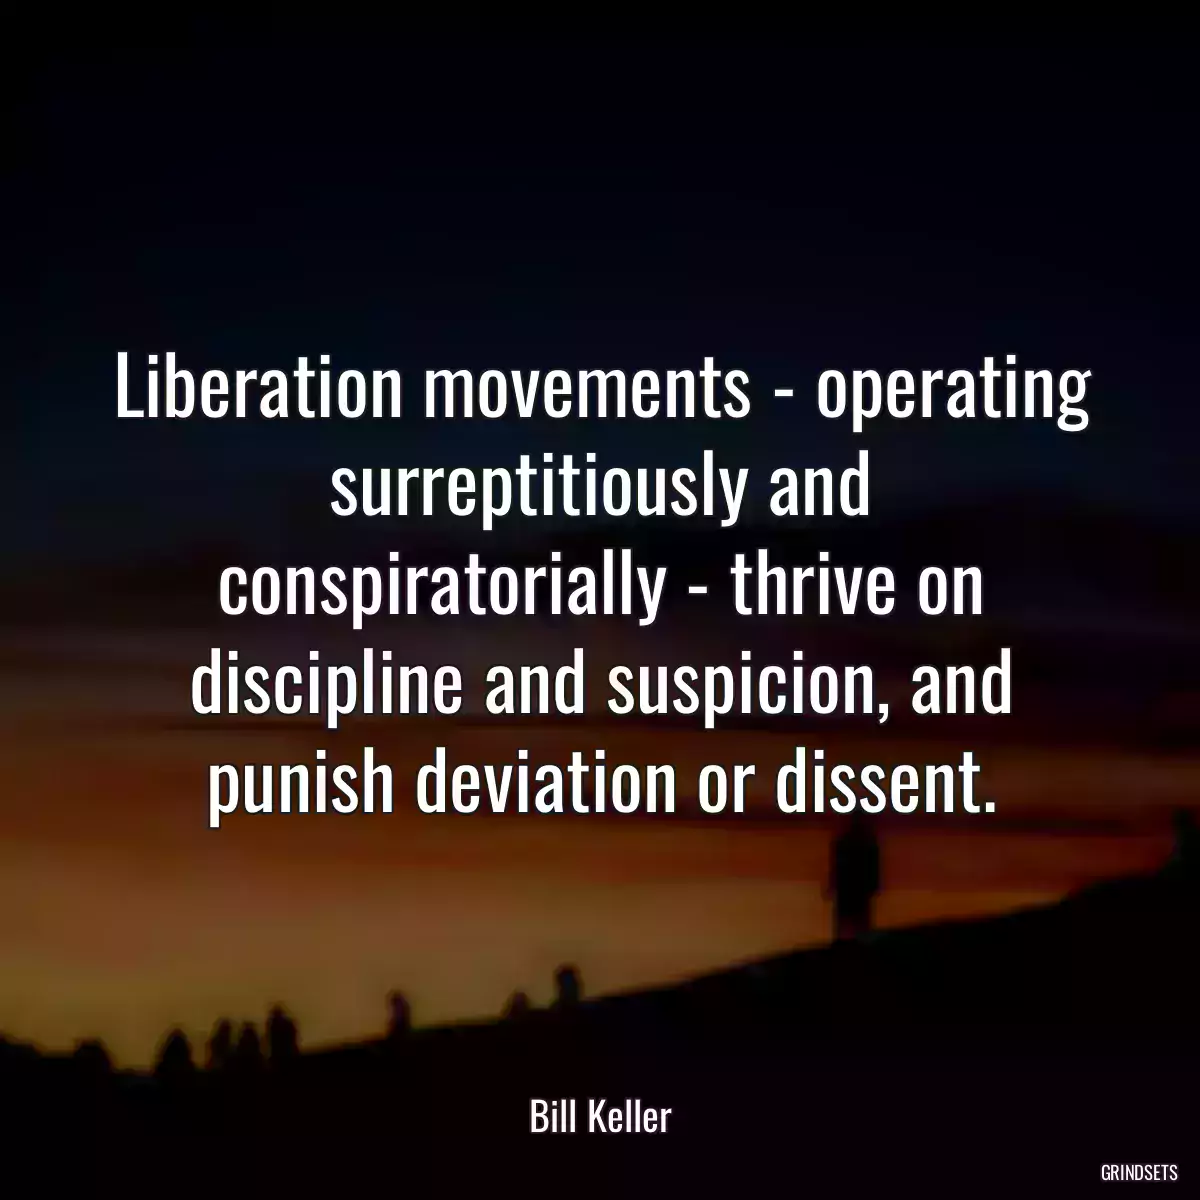 Liberation movements - operating surreptitiously and conspiratorially - thrive on discipline and suspicion, and punish deviation or dissent.